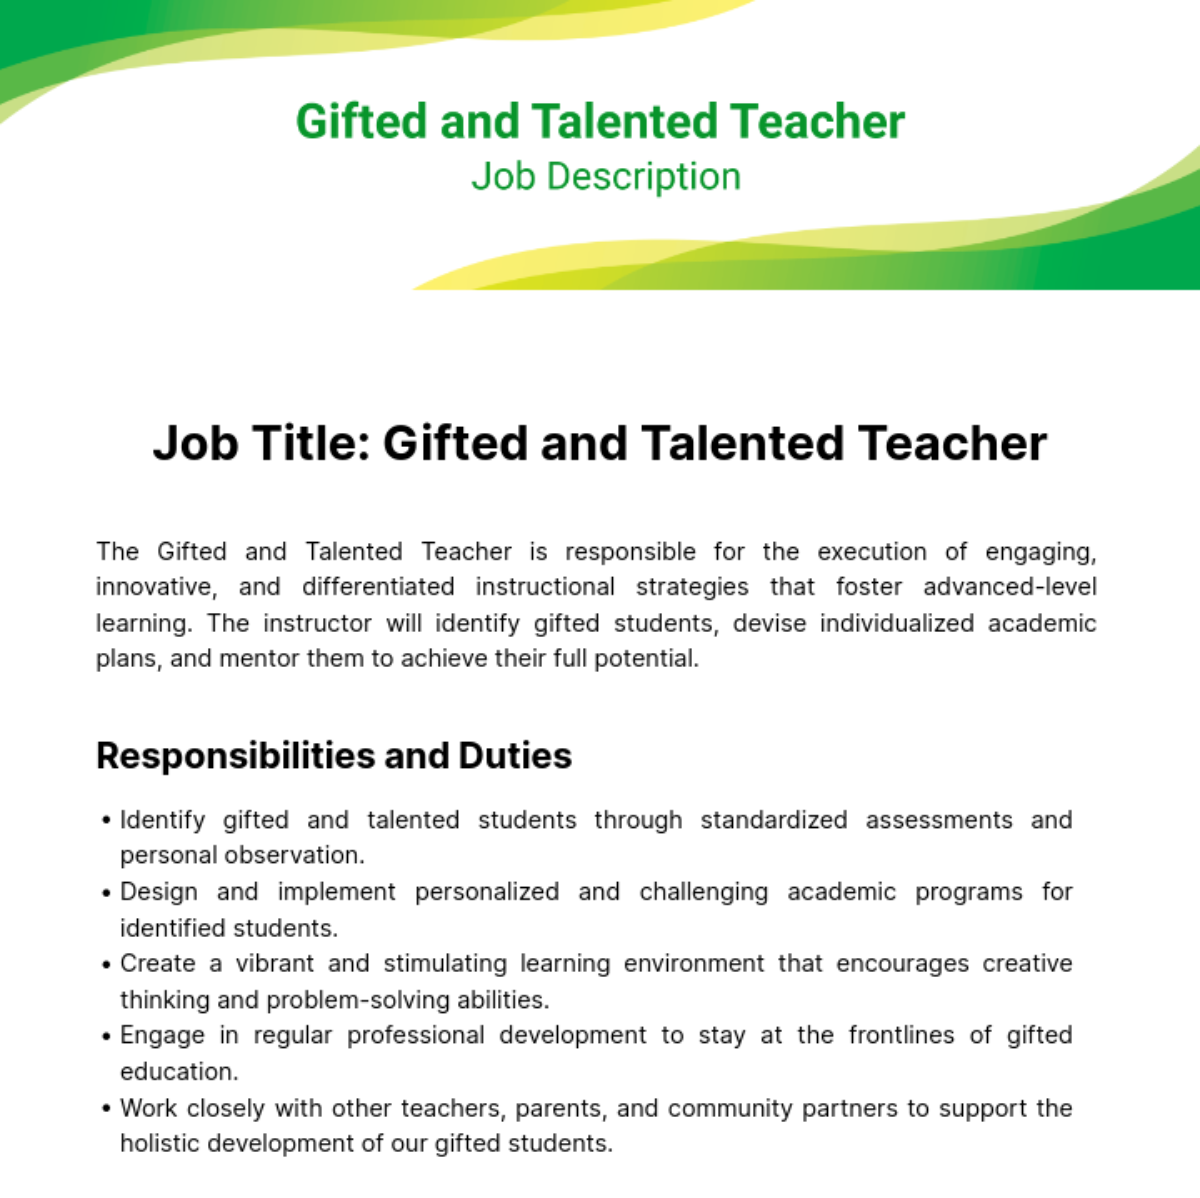 Gifted and Talented Teacher Job Description Template